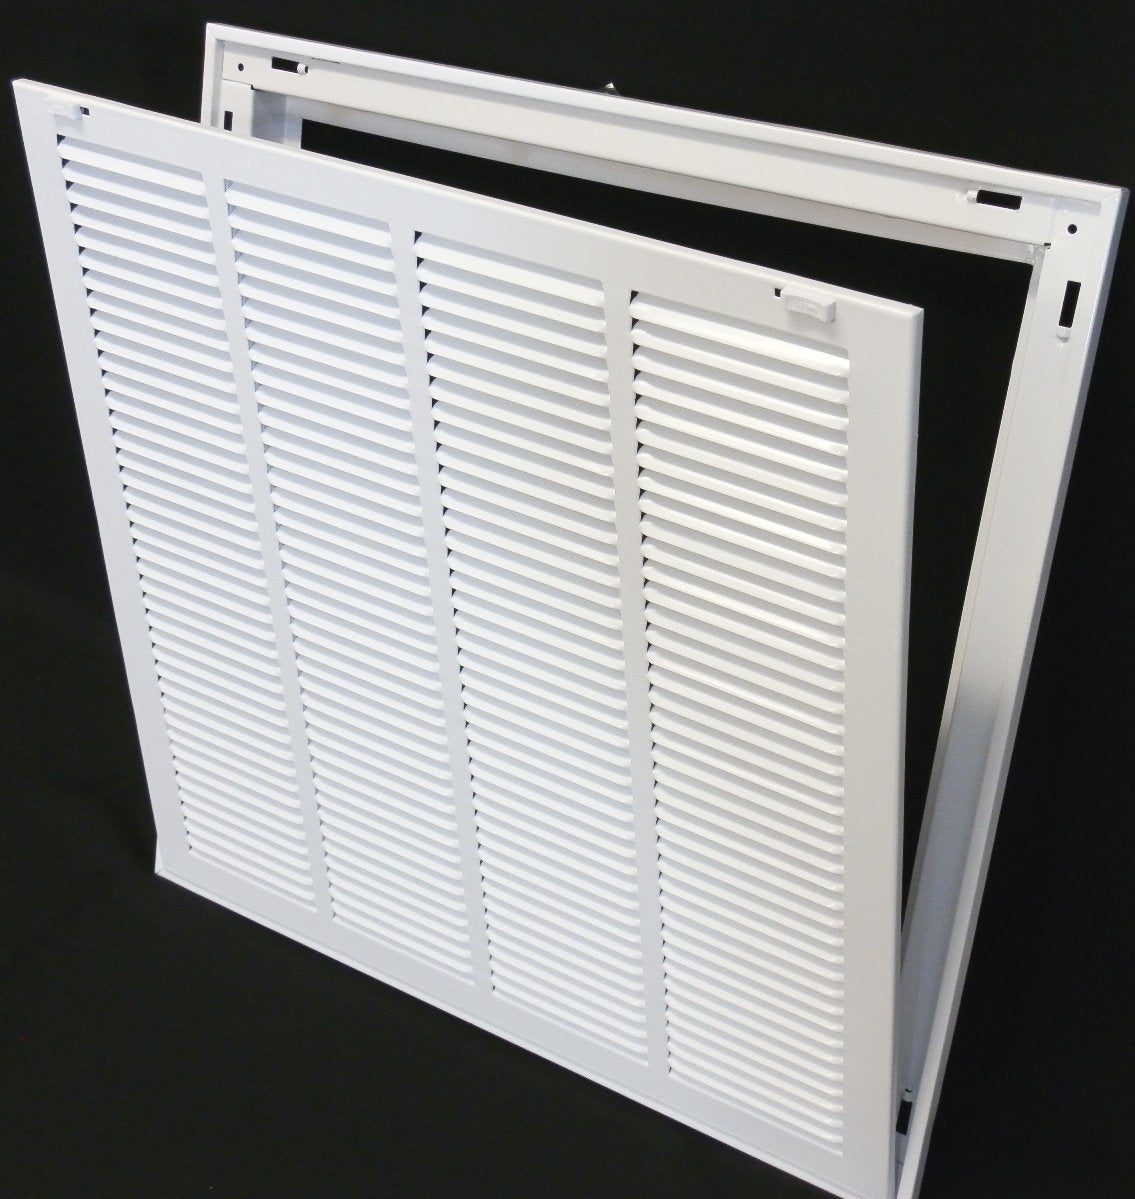 22&quot; X 24&quot; Steel Return Air Filter Grille for 1&quot; Filter - Removable Frame - [Outer Dimensions: 24 5/8&quot; X 26 5/8&quot;]